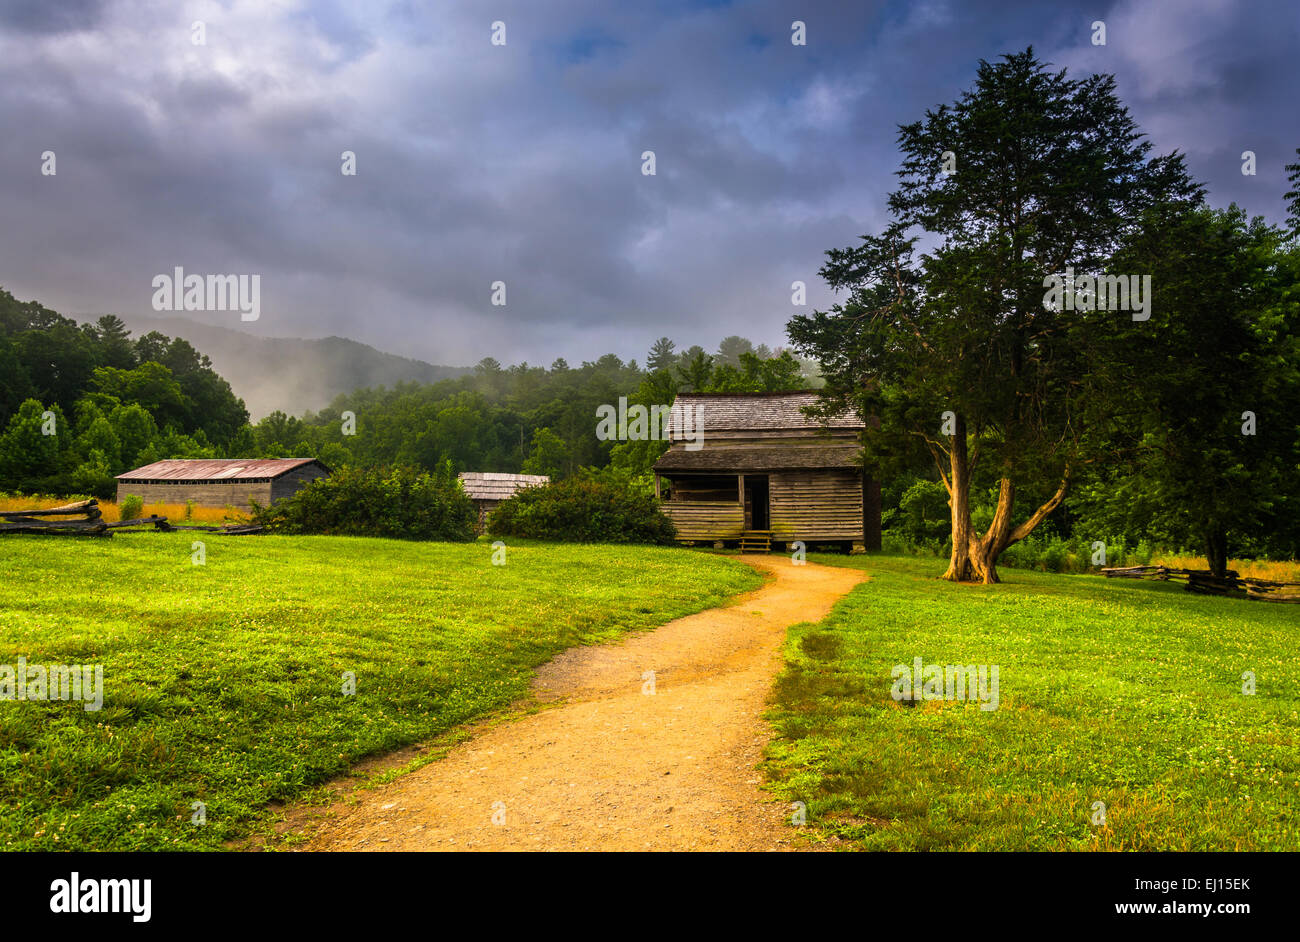 The John Oliver Cabin on a foggy morning at Cade's Cove, Great Smoky Mountains National Park, Tennessee. Stock Photo